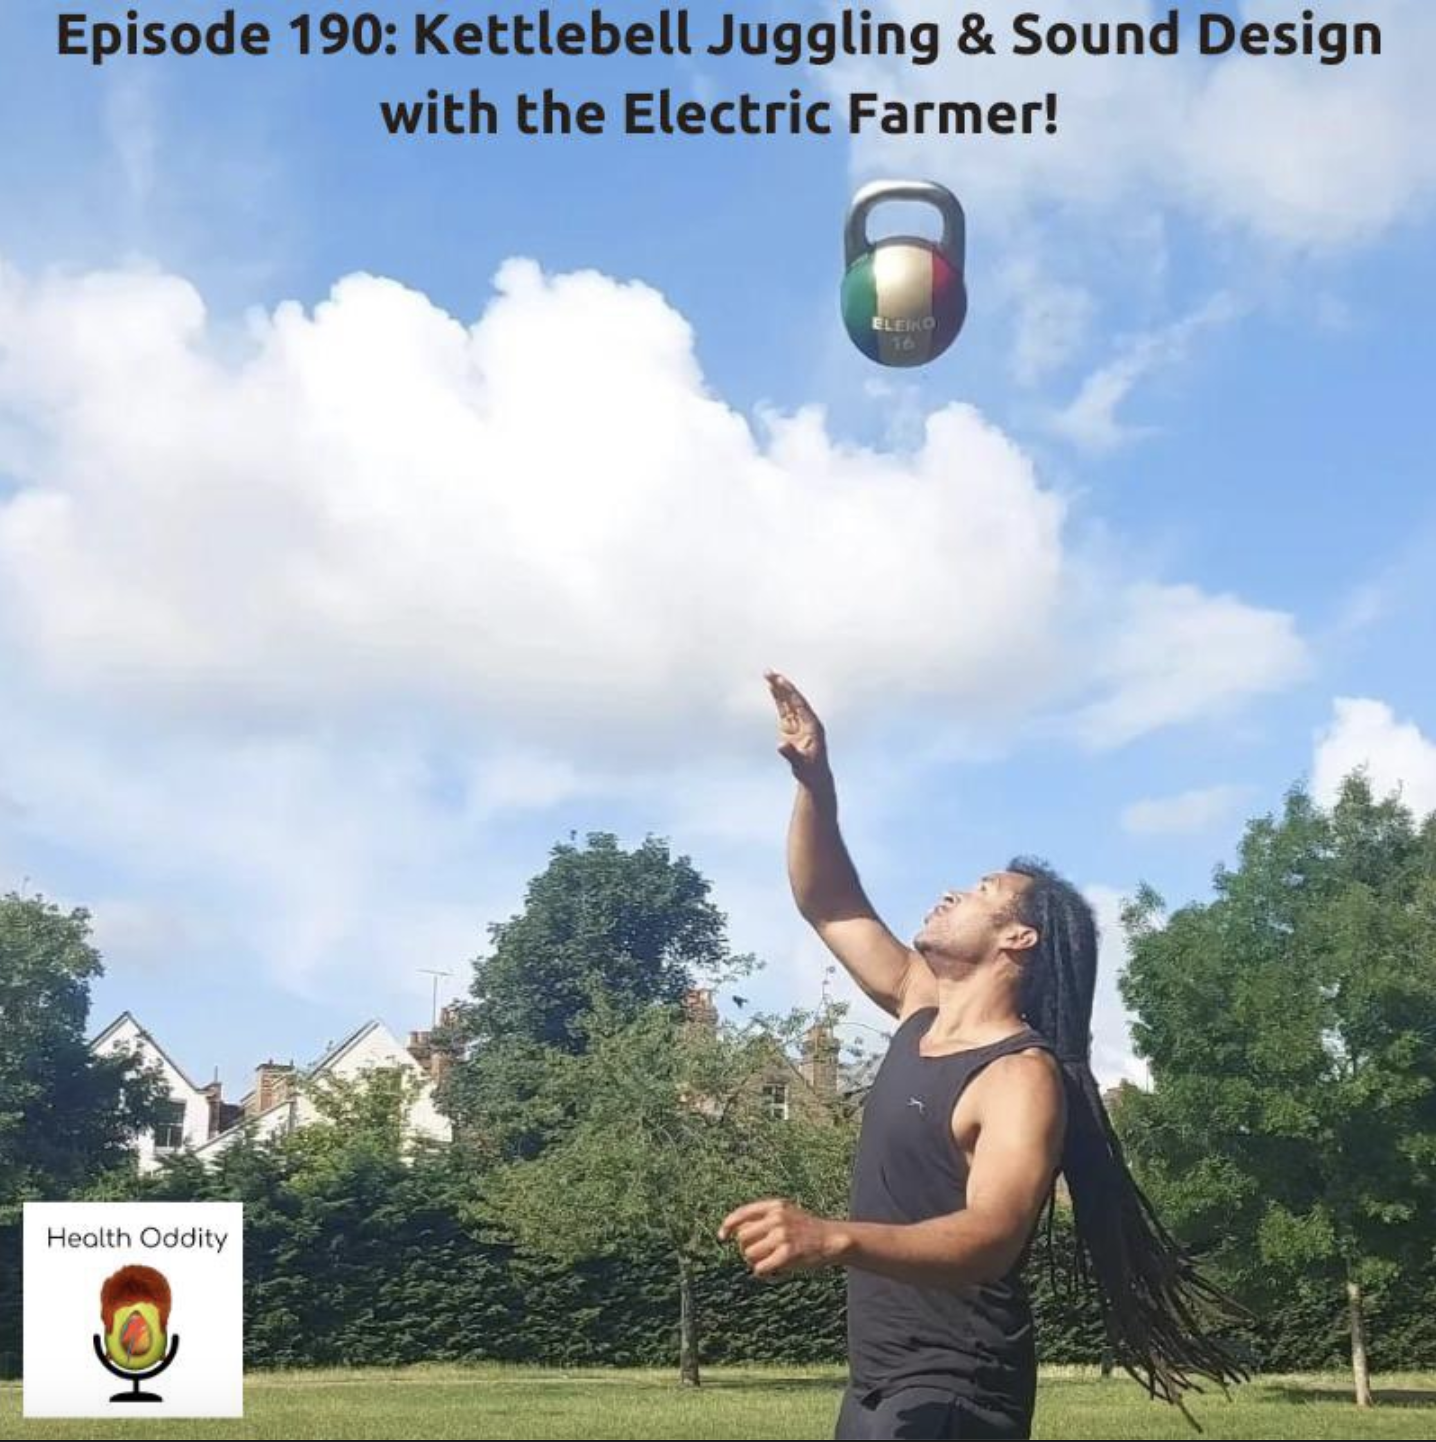 #190 Kettlebell Juggling & Sound Design with the Electric Farmer!